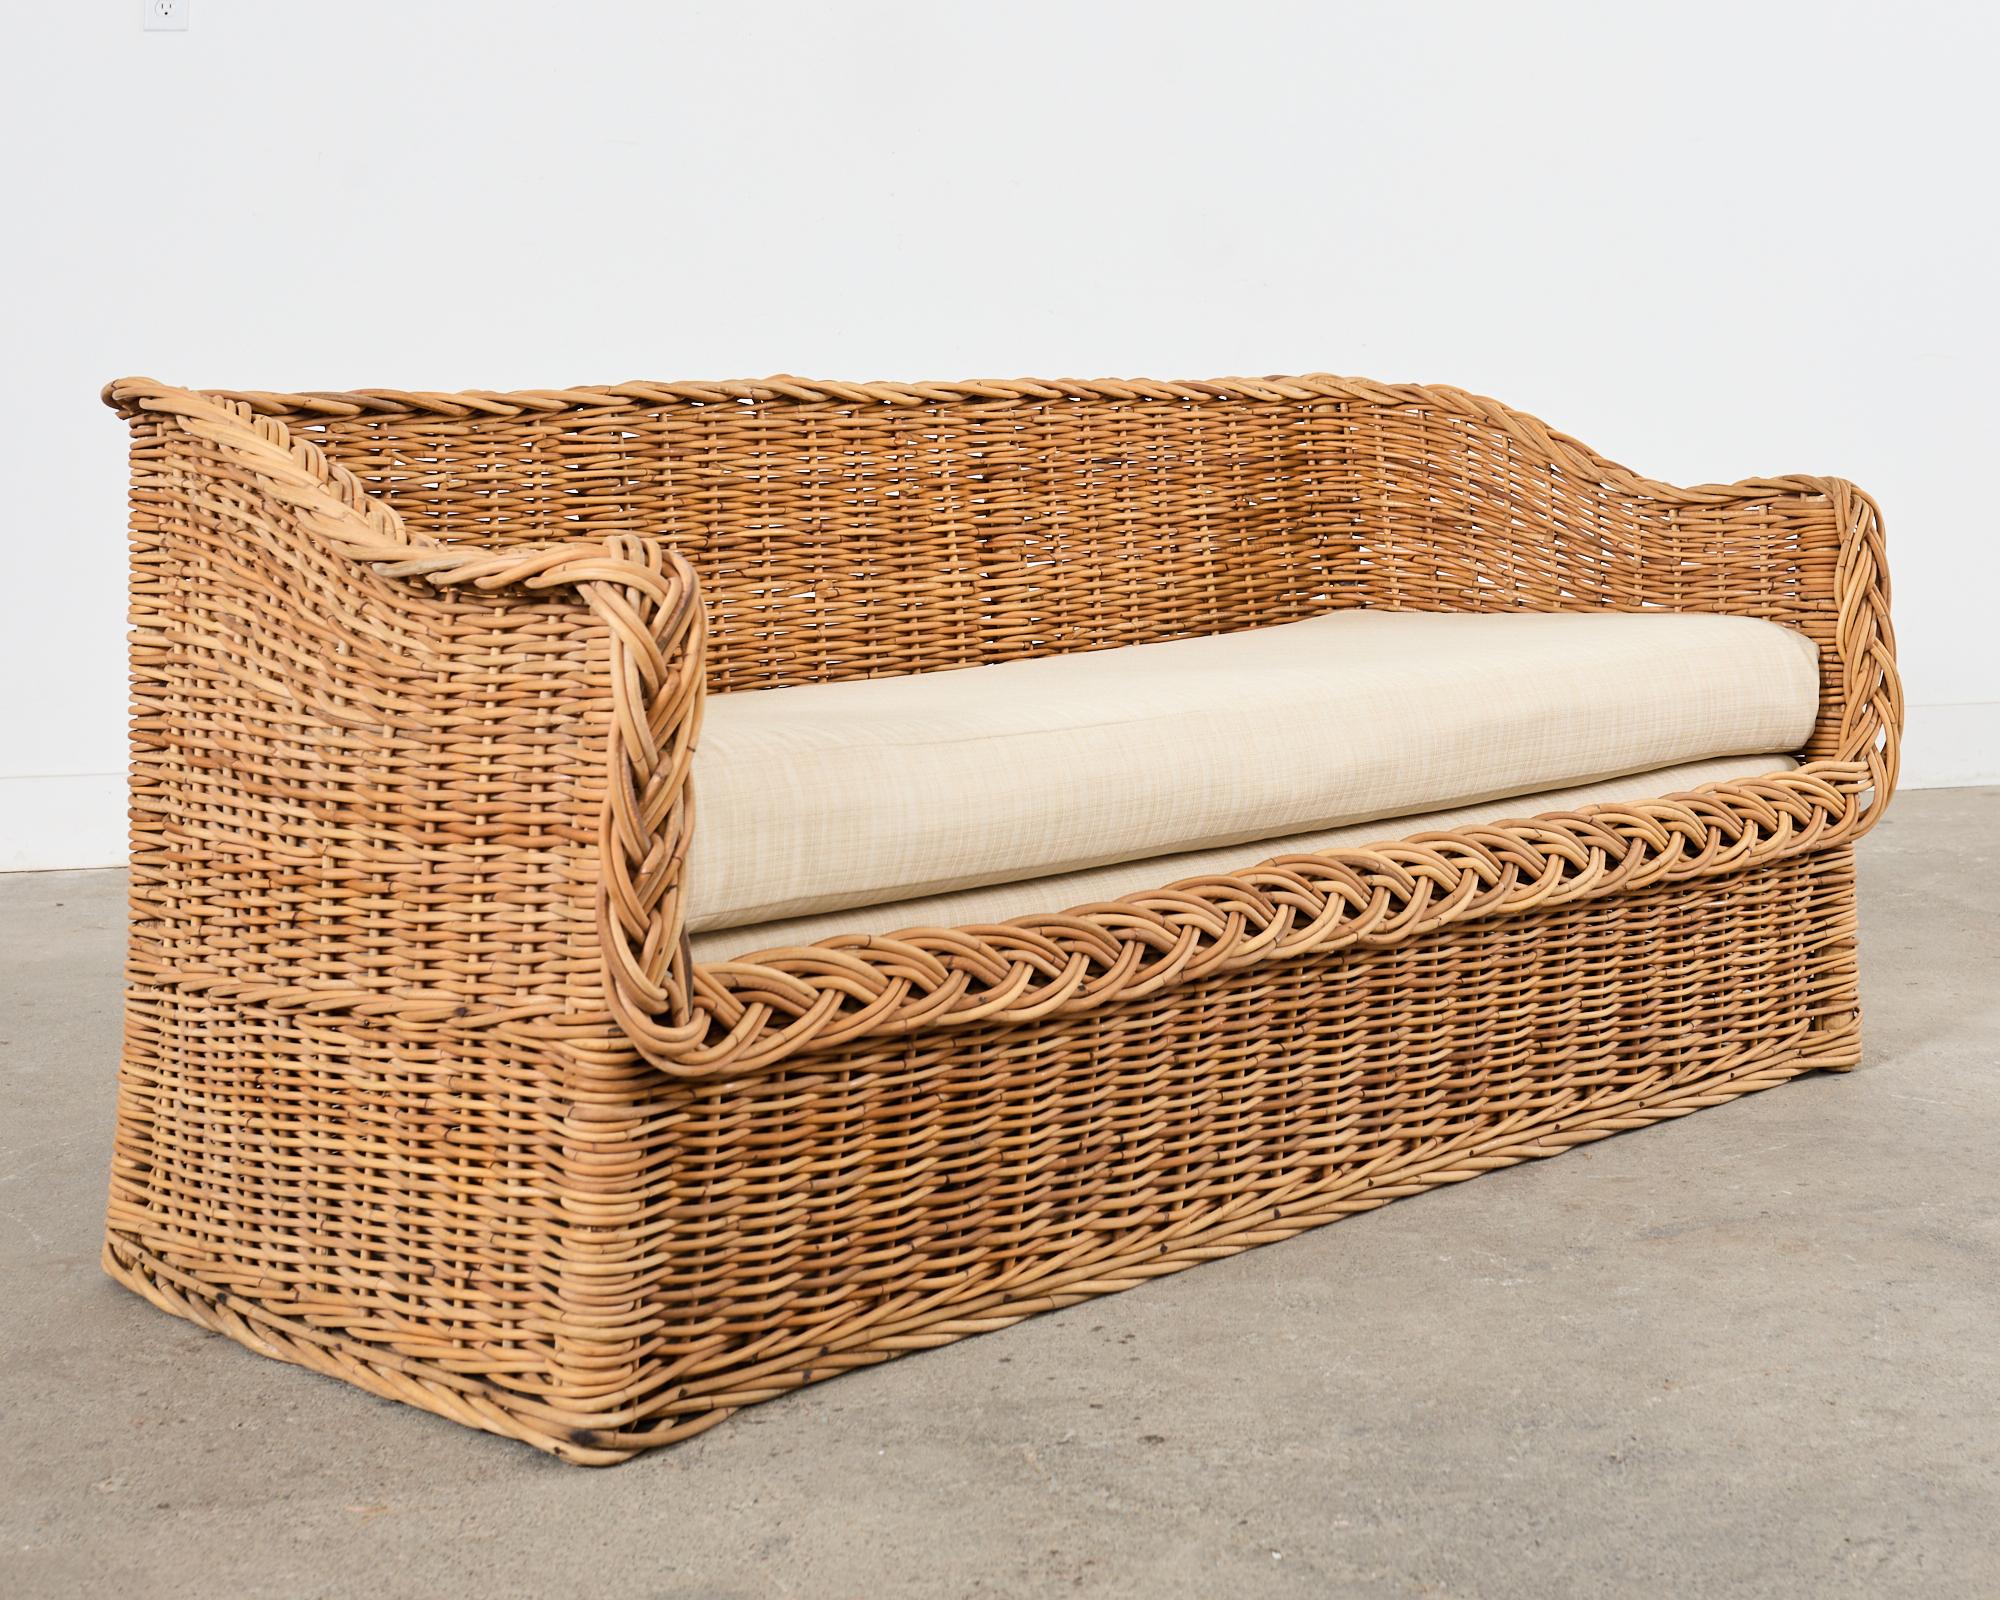 Michael Taylor Style Wicker Rattan Sofa by Wicker Works In Good Condition For Sale In Rio Vista, CA